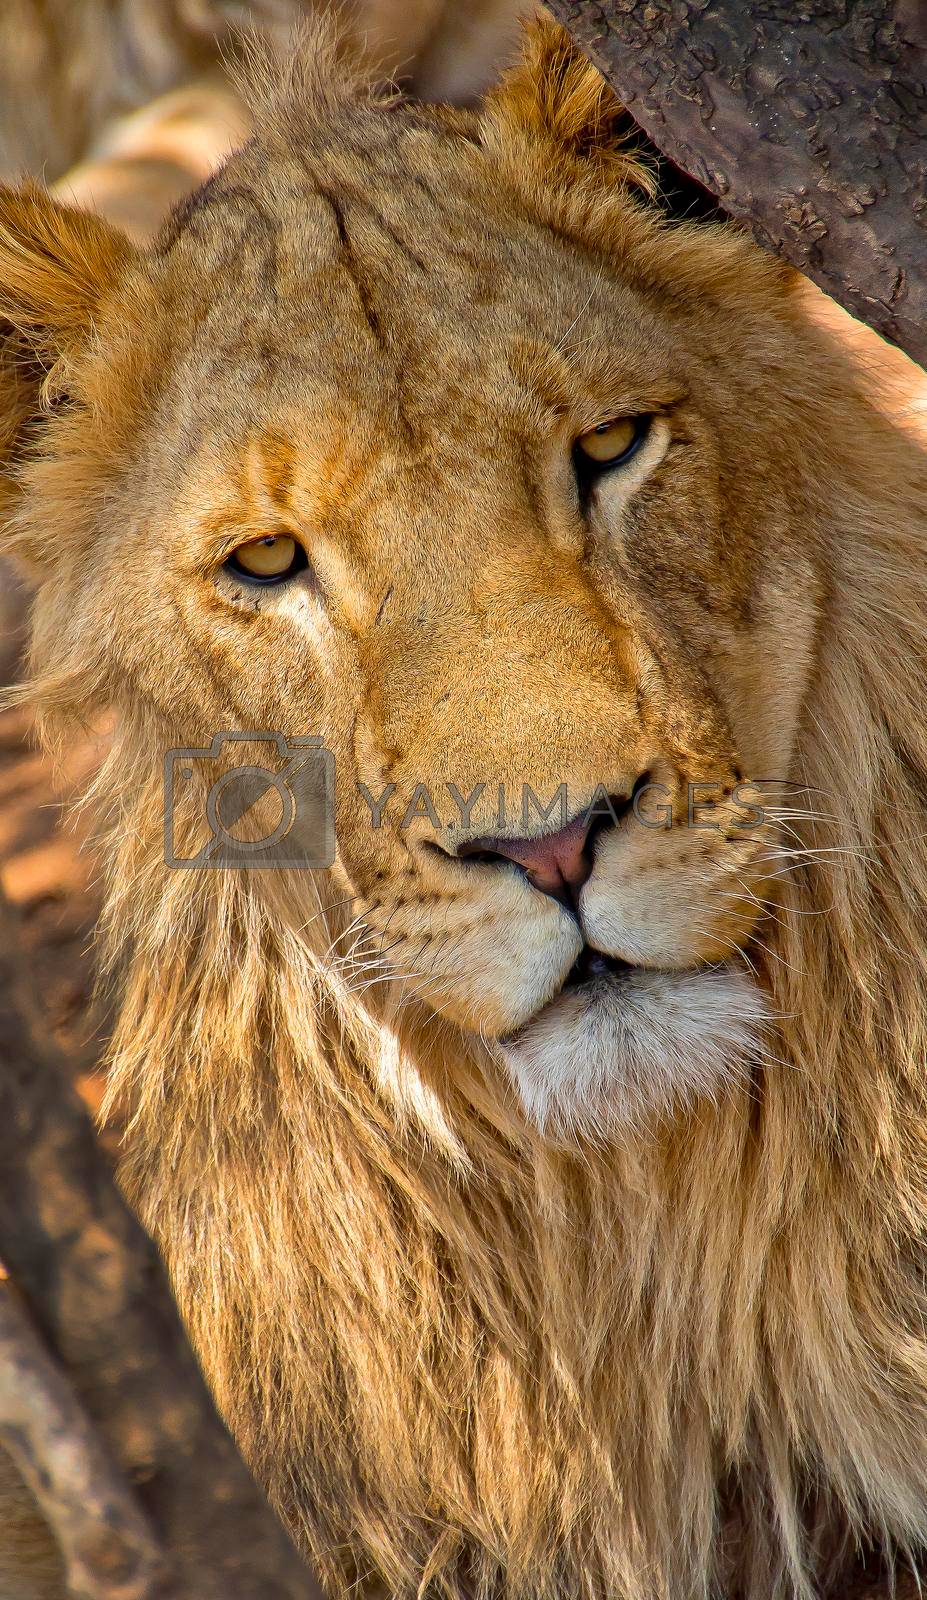 Royalty free image of Lion, Wildlife Reserve, South Africa by alcaproac